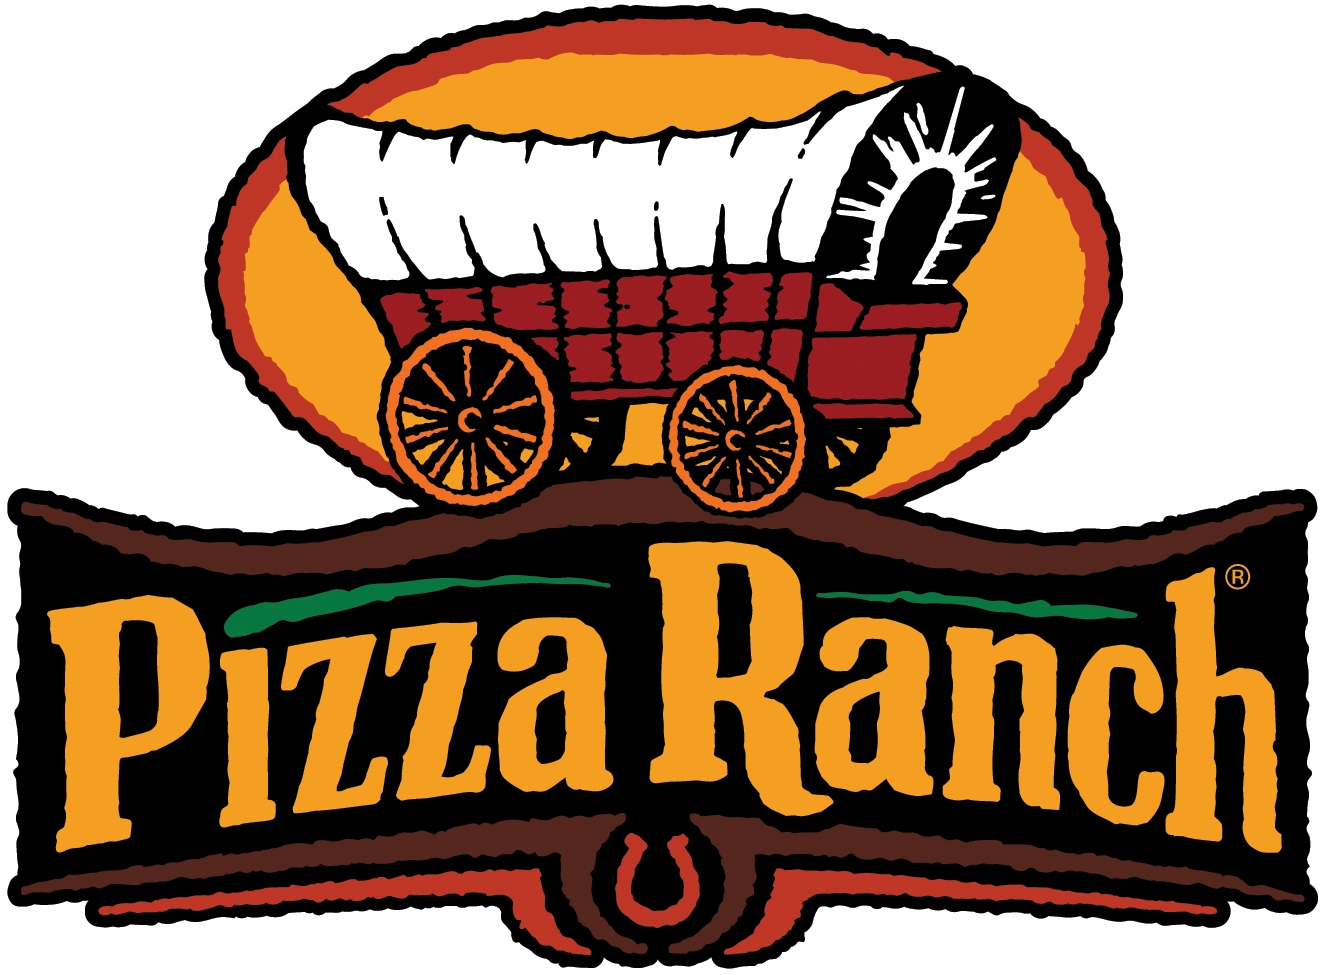 The Pizza Ranch